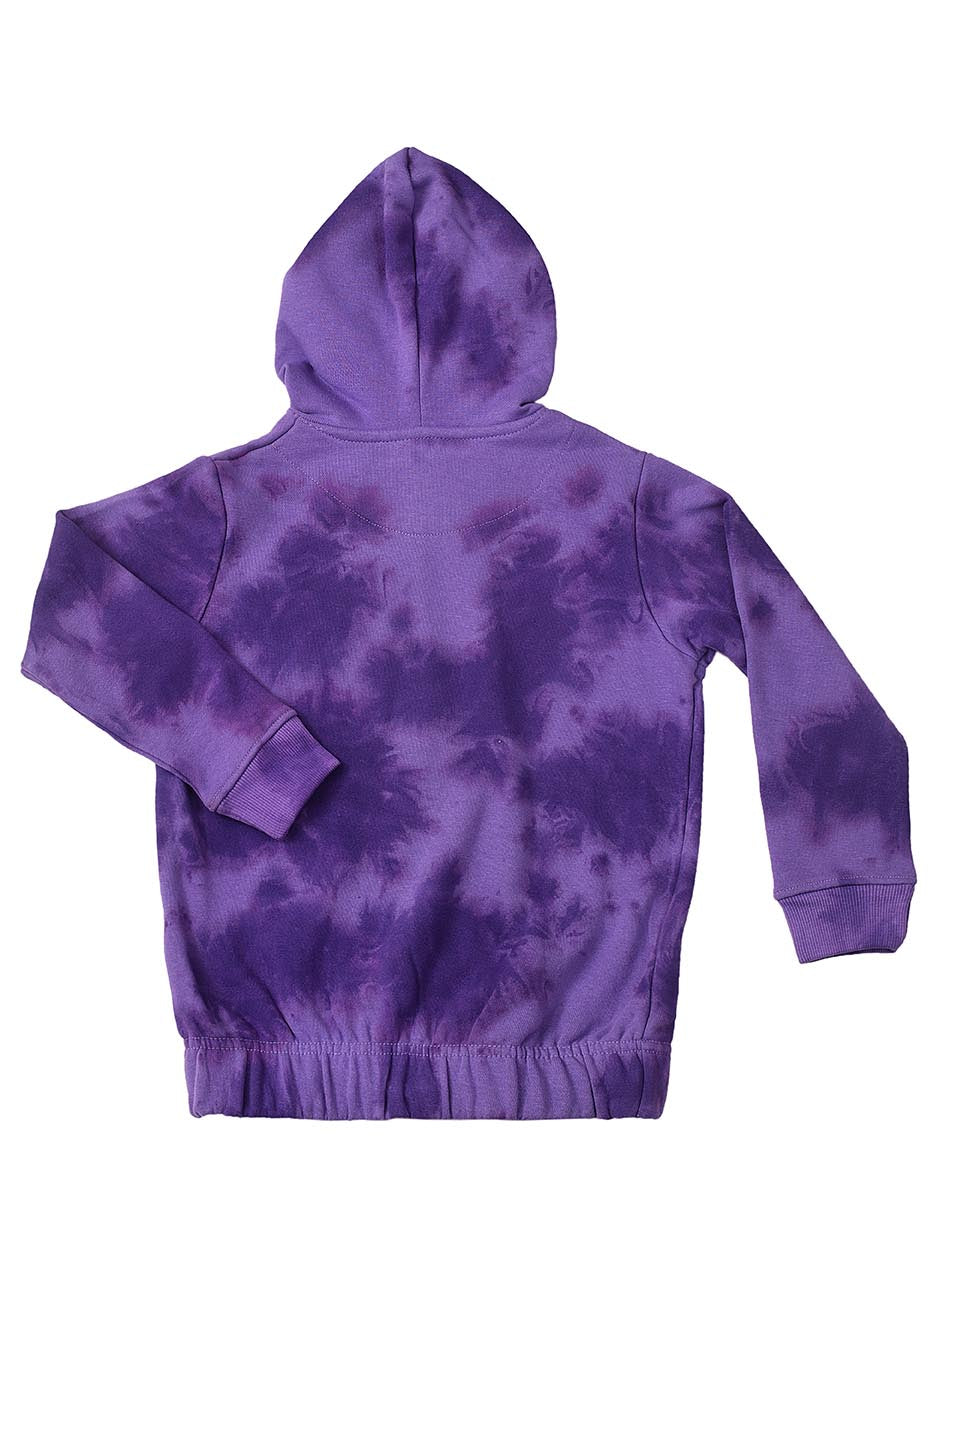 KDS-GC-12624 HOODED PULL OVER PRINTED PURPLE